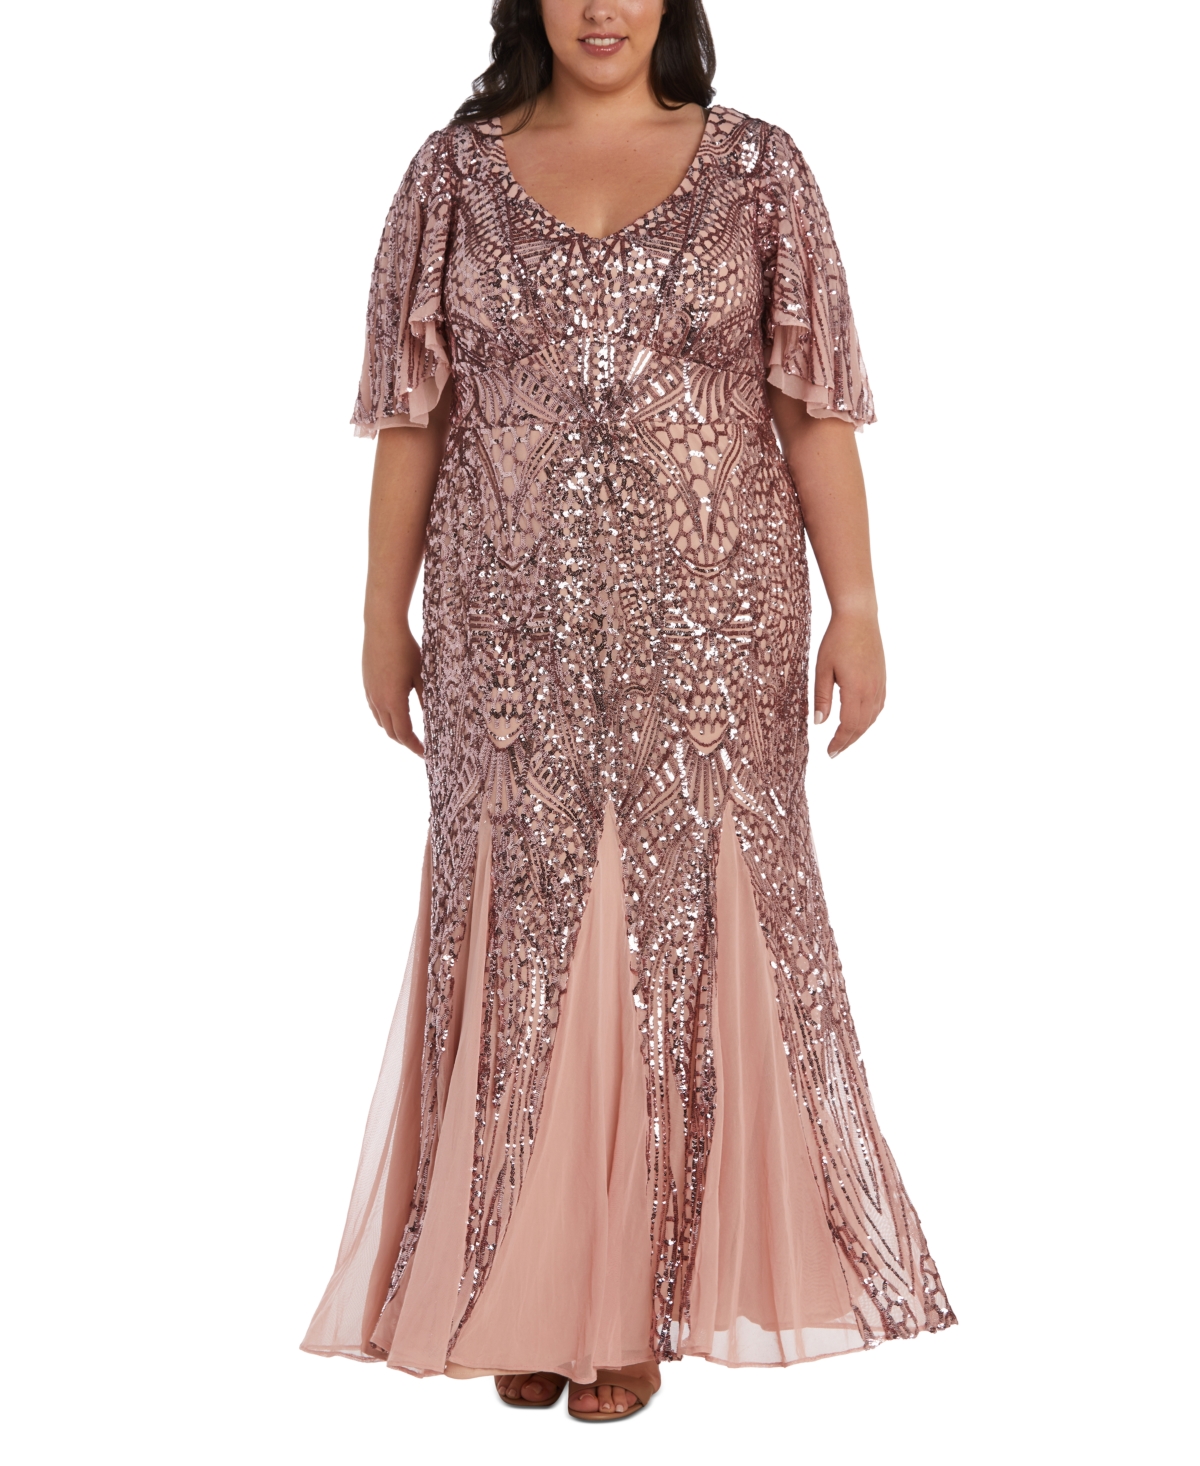 1920s Style Dresses, 1920s Dress Fashions You Will Love Nightway Plus Size Sequin Flutter-Sleeve Godet Gown - Mauve $209.00 AT vintagedancer.com